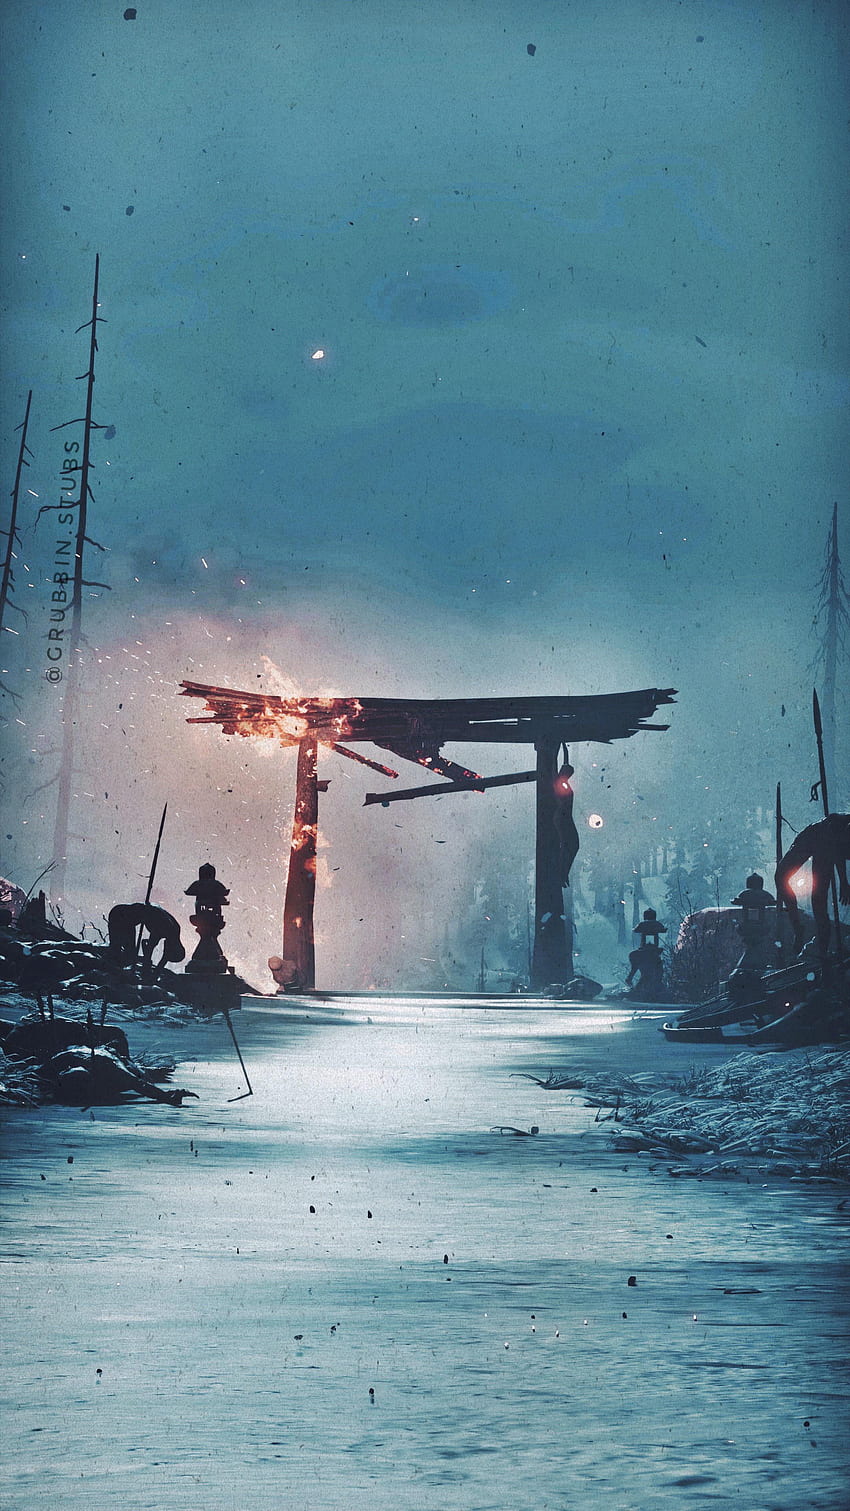 Ghost Of Tsushima Is Beautiful. I Often Make Phone Using Mode, So Here's One For R Gaming! : Gaming HD phone wallpaper